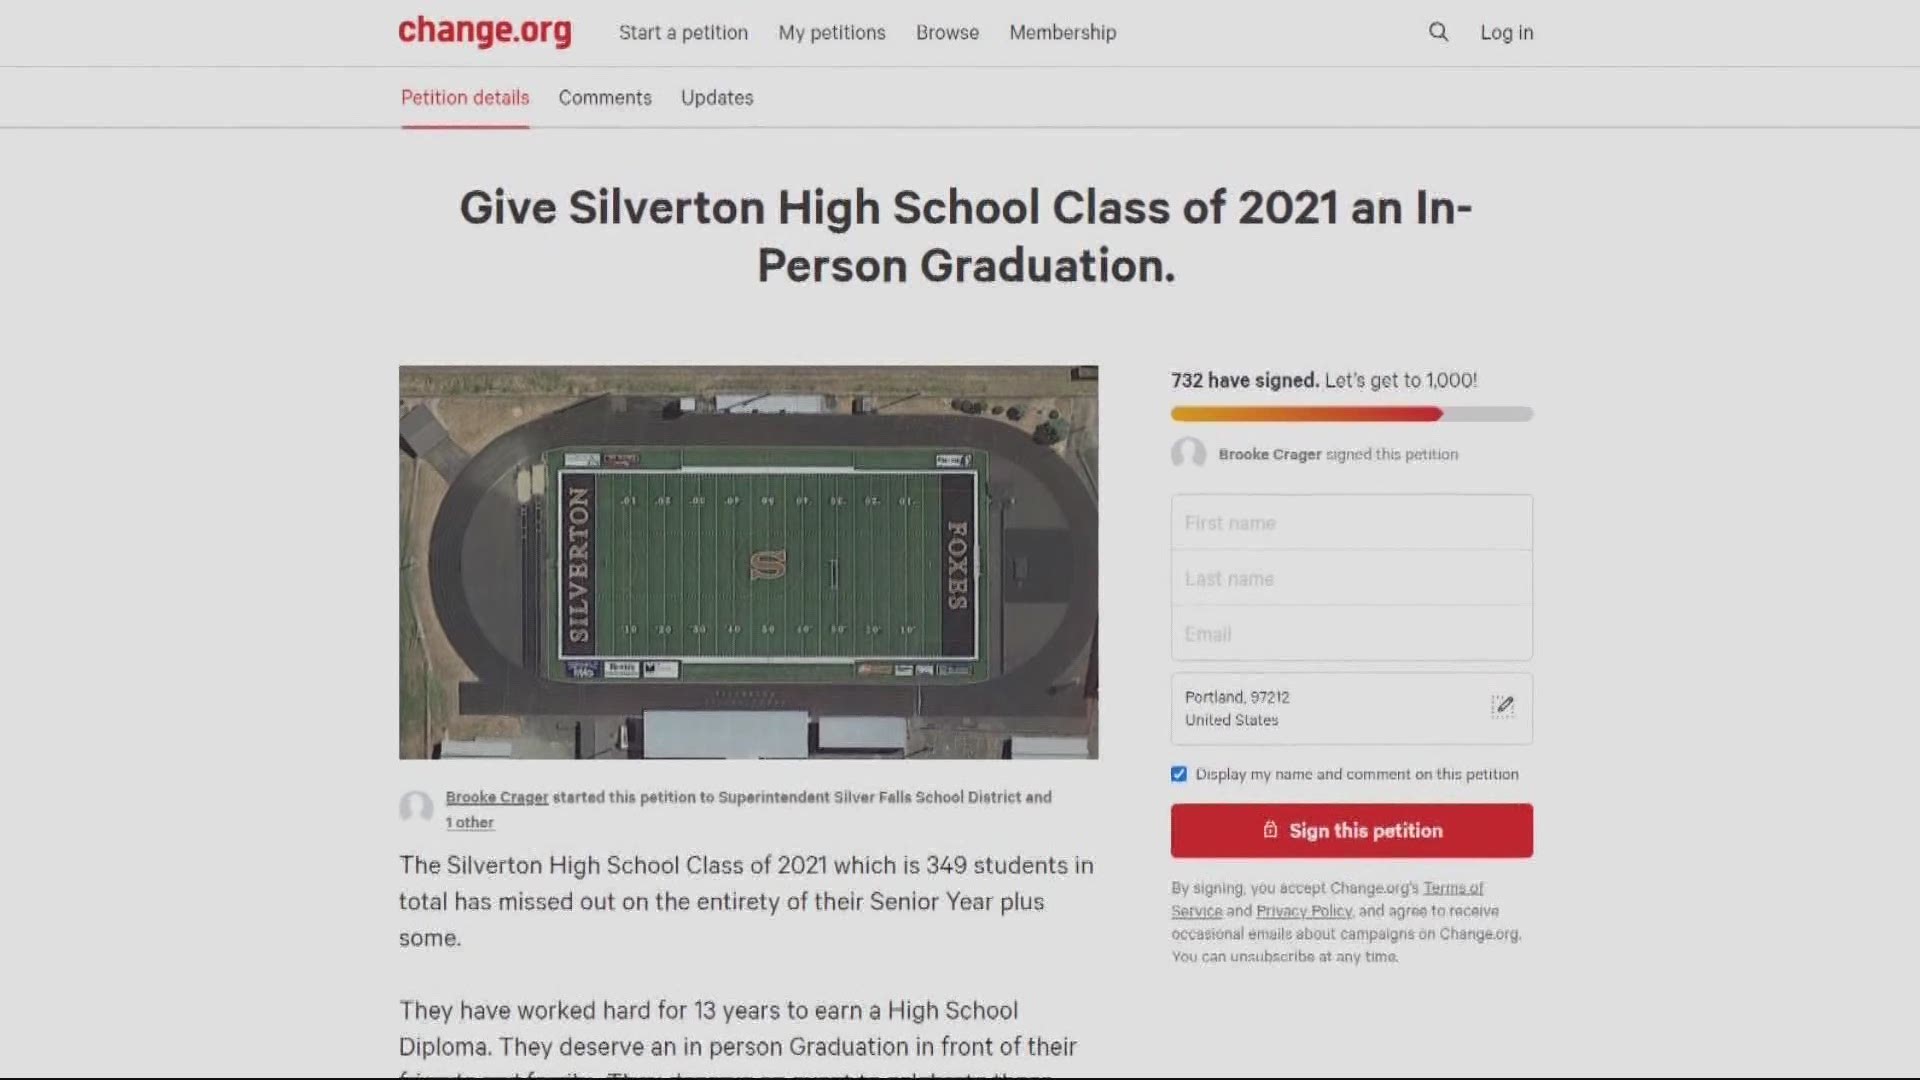 Parents in the Silverton school district have been petitioning for an in-person graduation for high school seniors. Today the district responded.